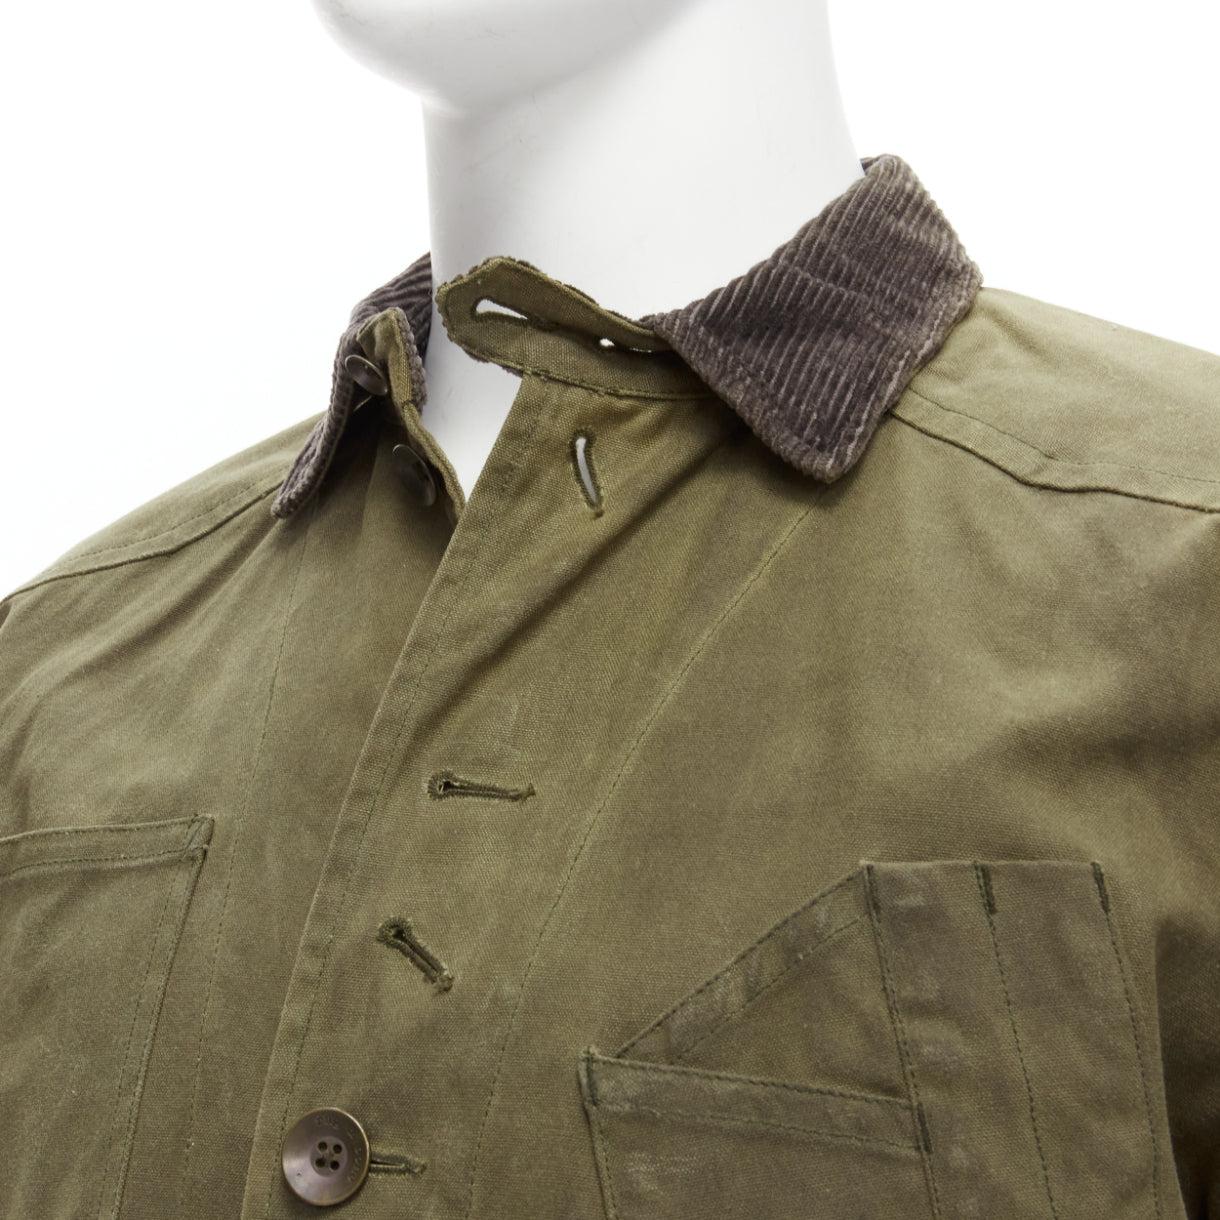 RAG & BONE Barneys moss green waxed cotton corduroy collar 4 pockets jacket US38 M
Reference: YNWG/A00182
Brand: Rag & Bone
Collection: Barneys
Material: Cotton
Color: Green
Pattern: Solid
Closure: Button
Lining: Multicolour Fabric
Extra Details: